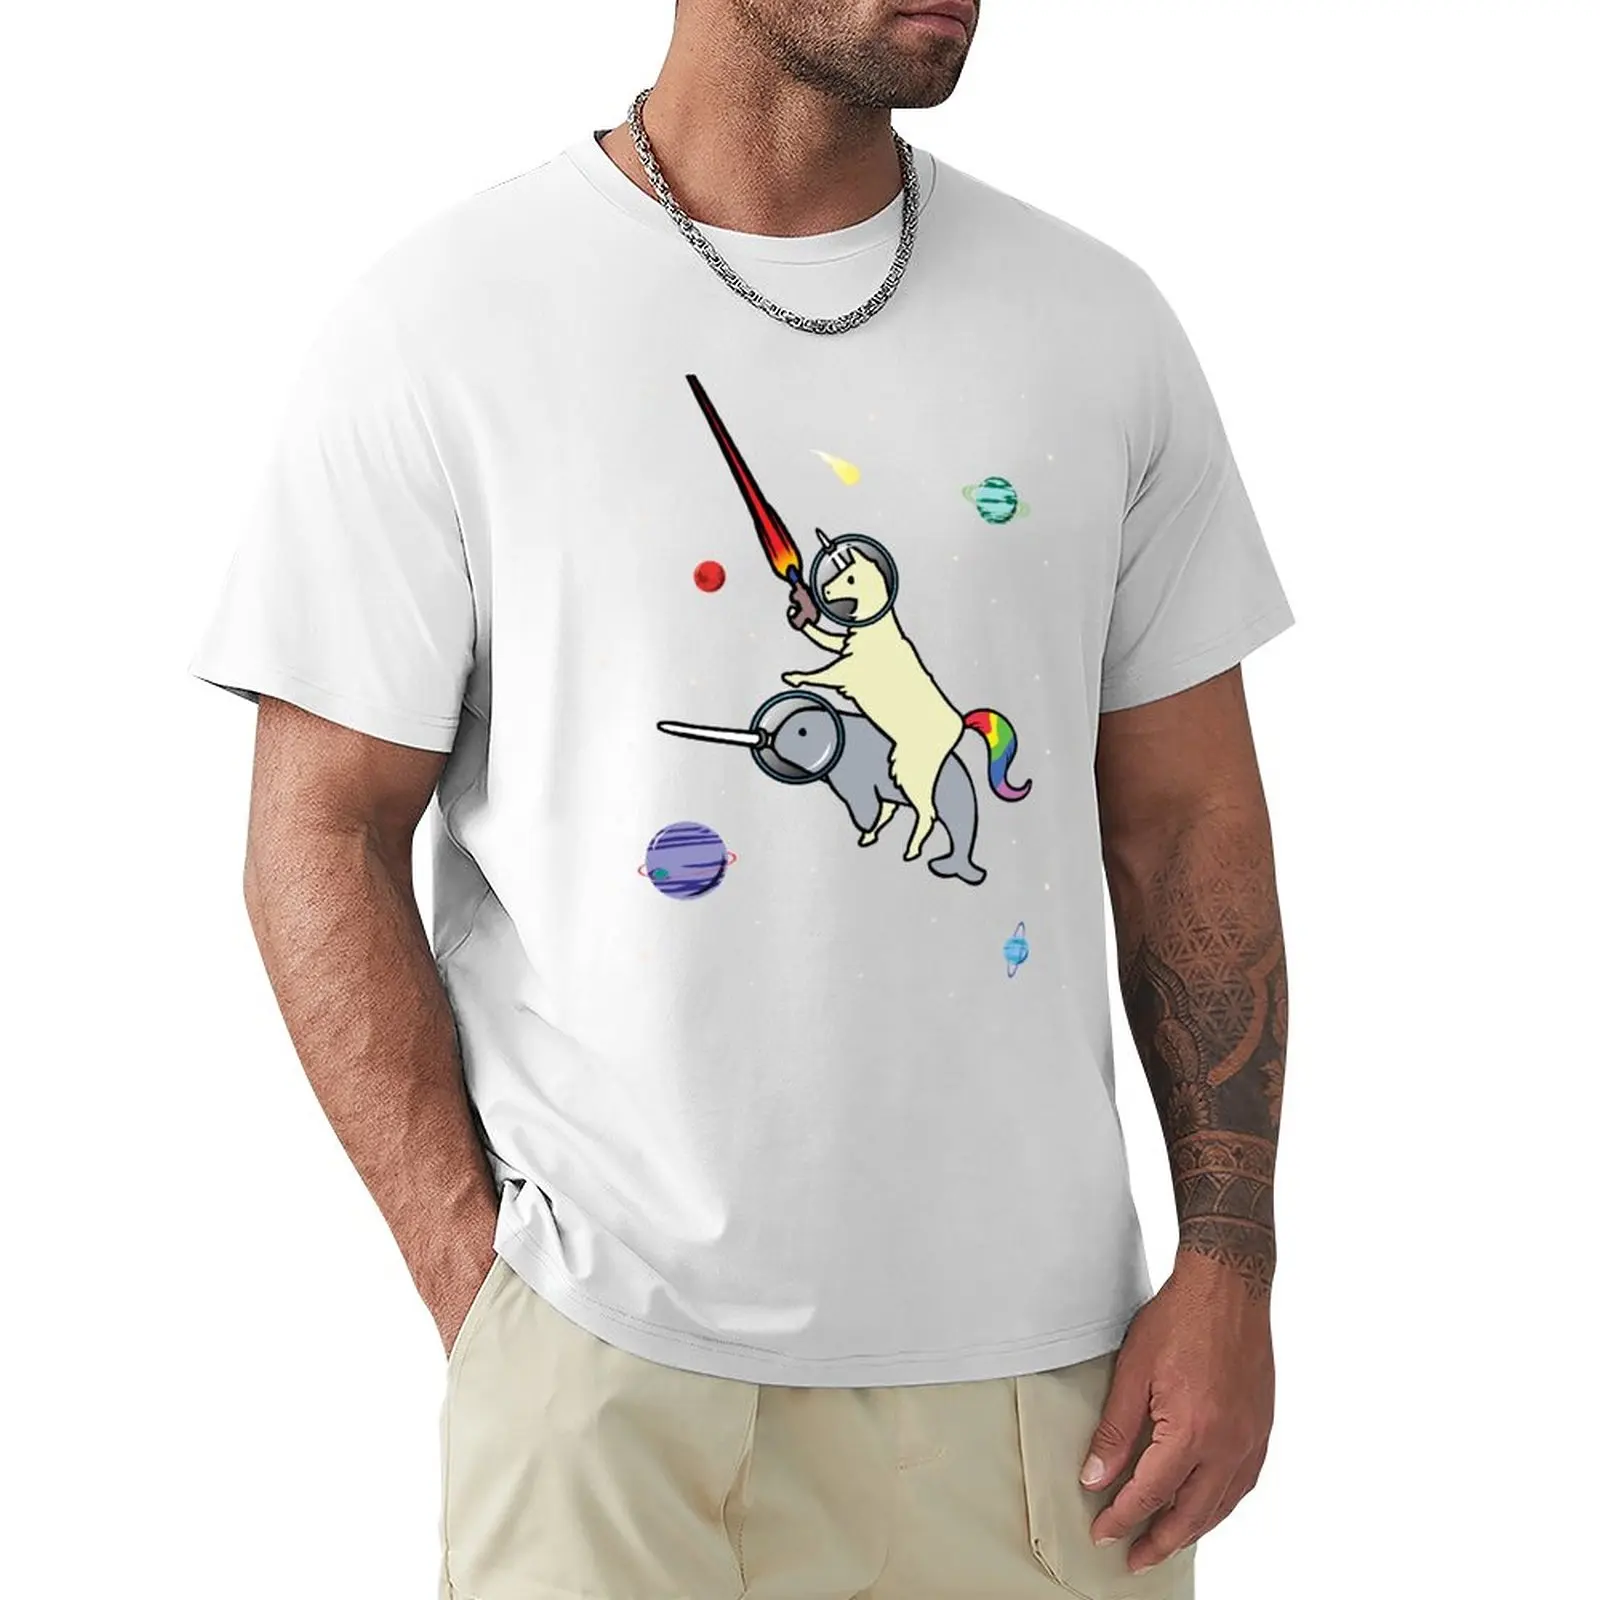 

Llamacorn Riding Narwhal In Space T-Shirt quick drying shirt boys t shirts sublime t shirt mens graphic t-shirts big and tall